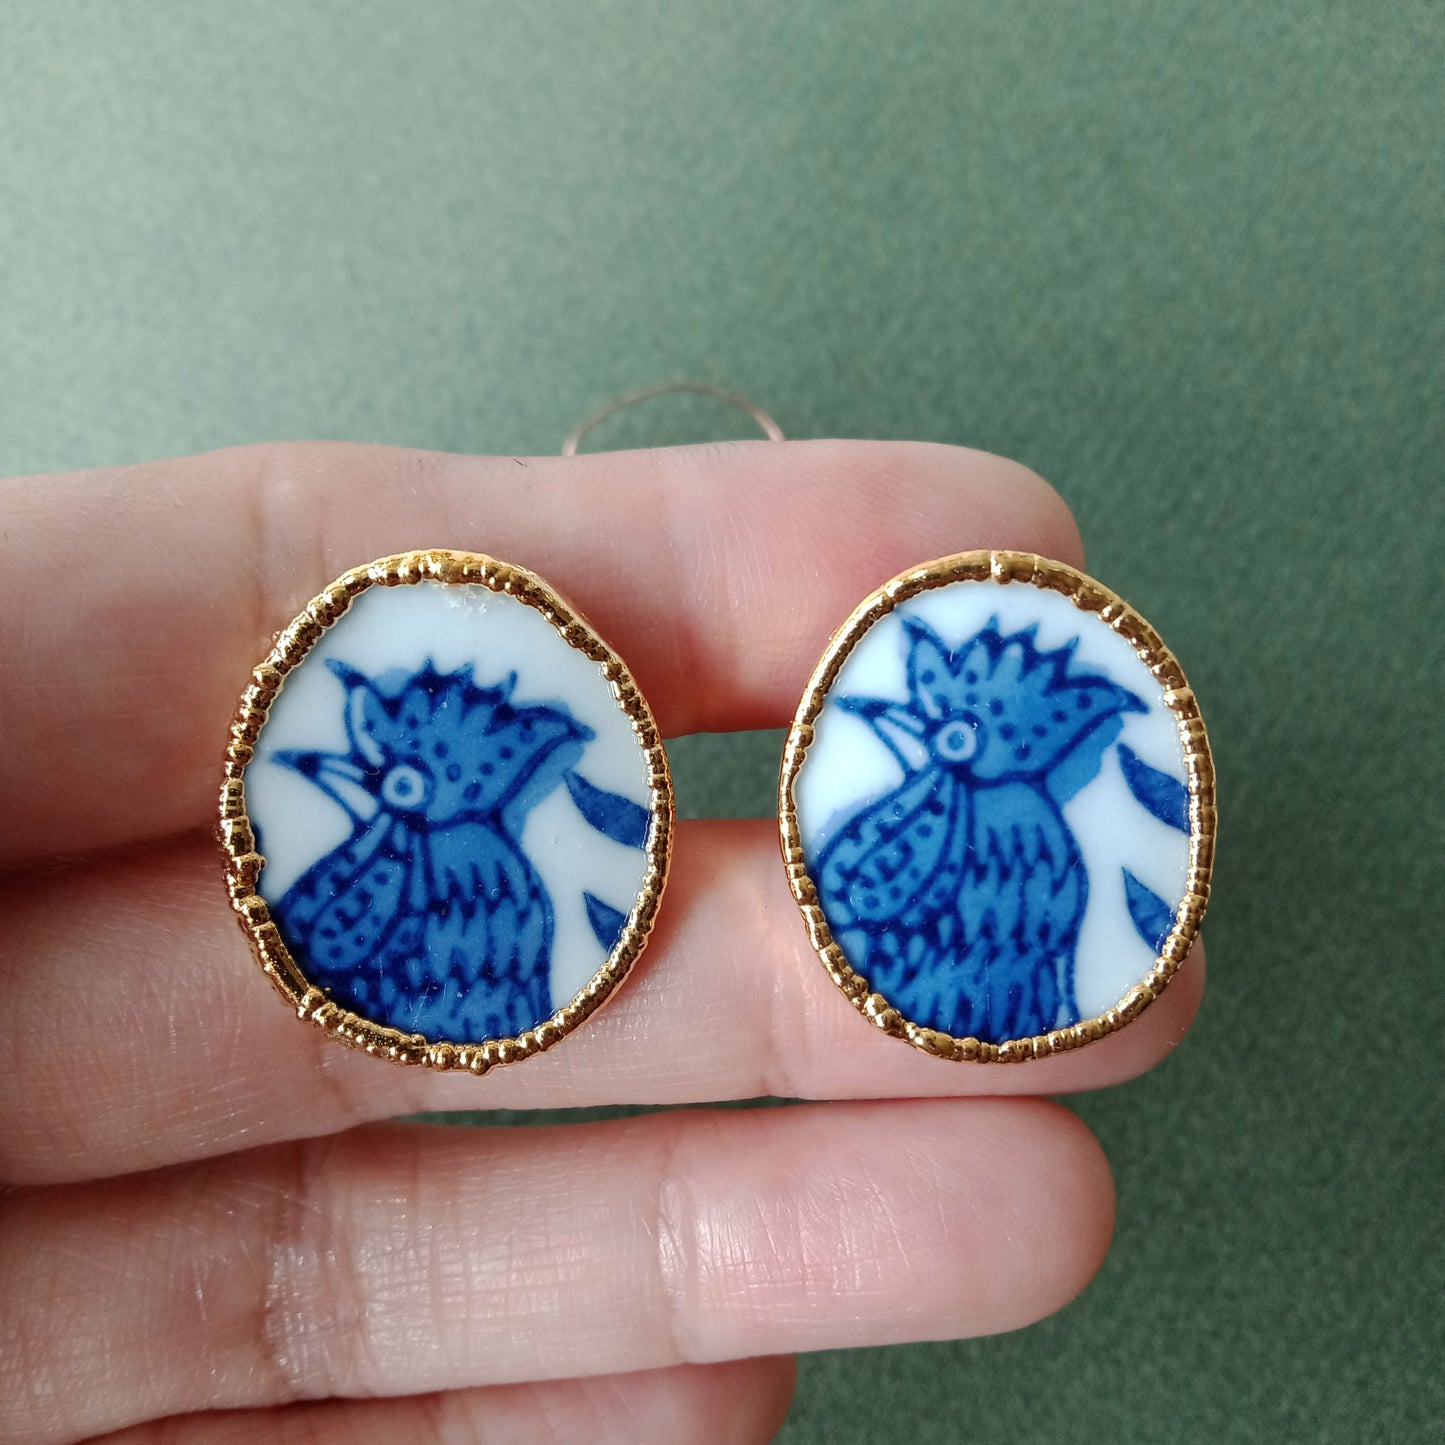 Blue and white rooster cufflinks